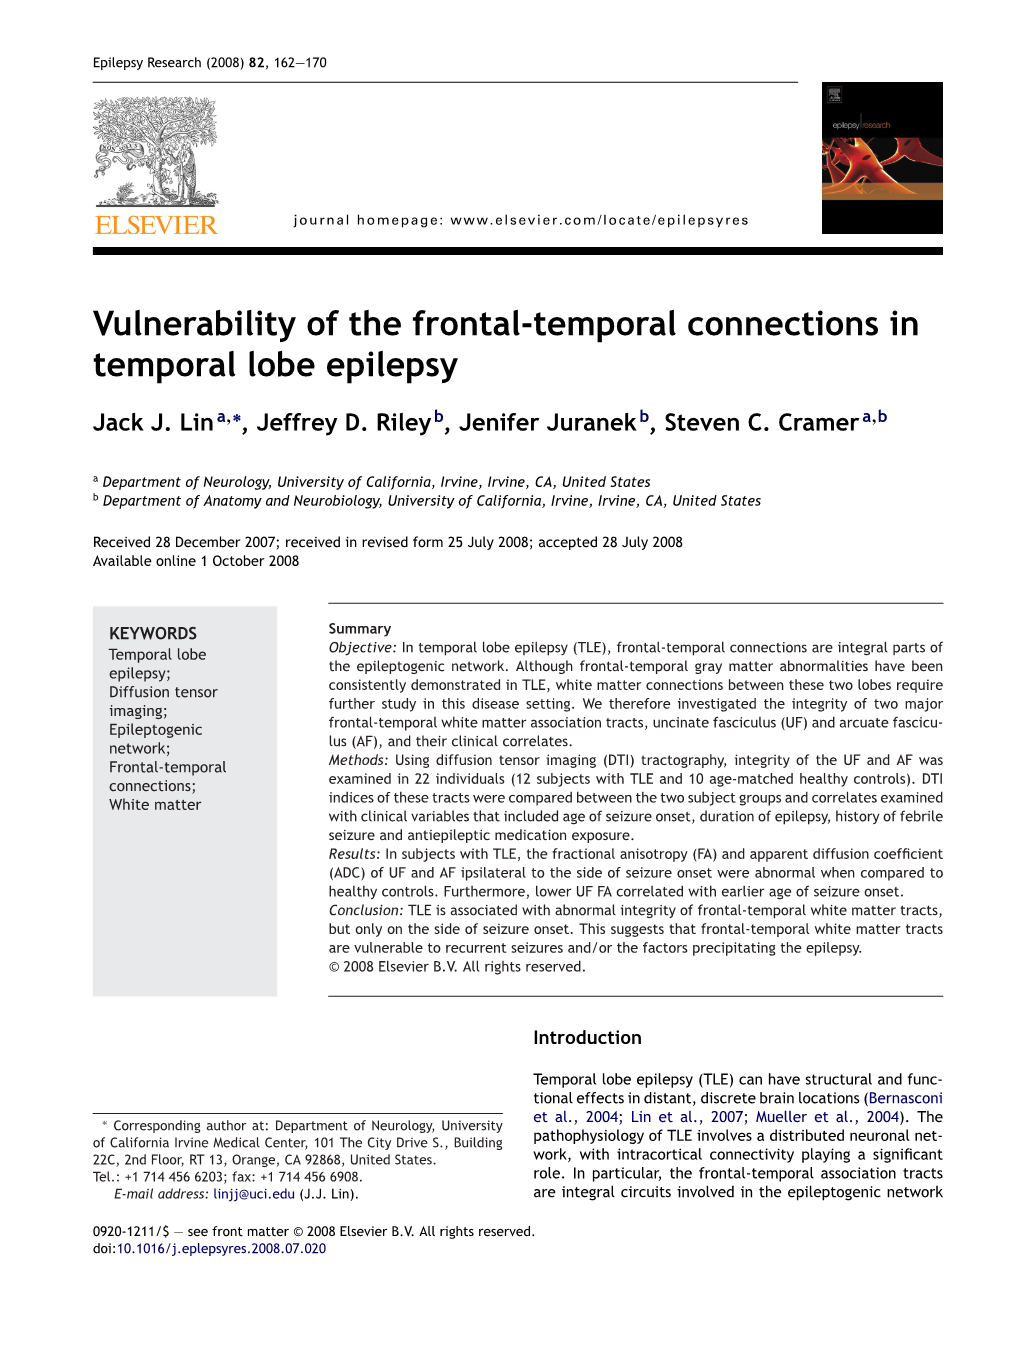 Vulnerability of the Frontal-Temporal Connections in Temporal Lobe Epilepsy